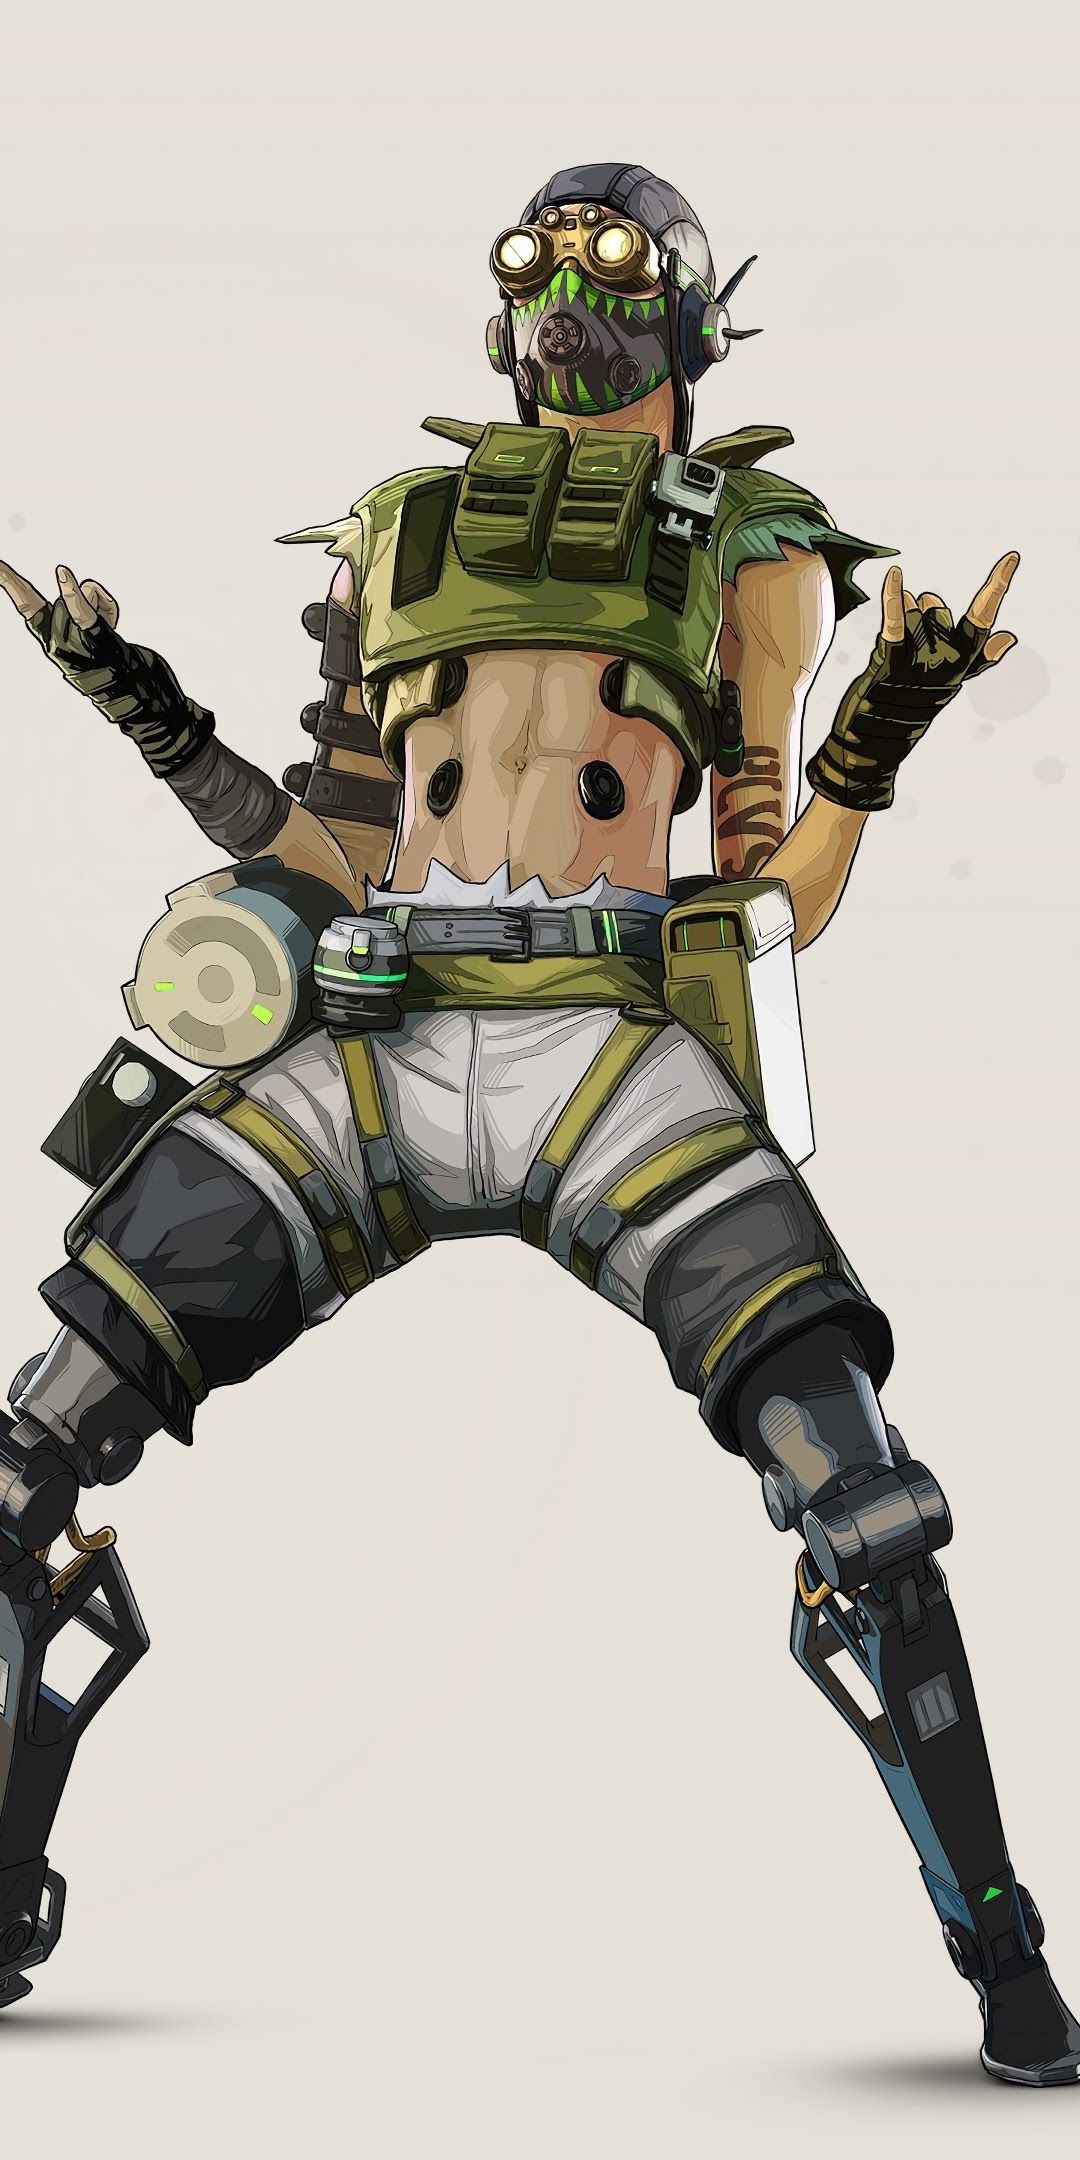 Apex Legends Live Iphone Wallpapers